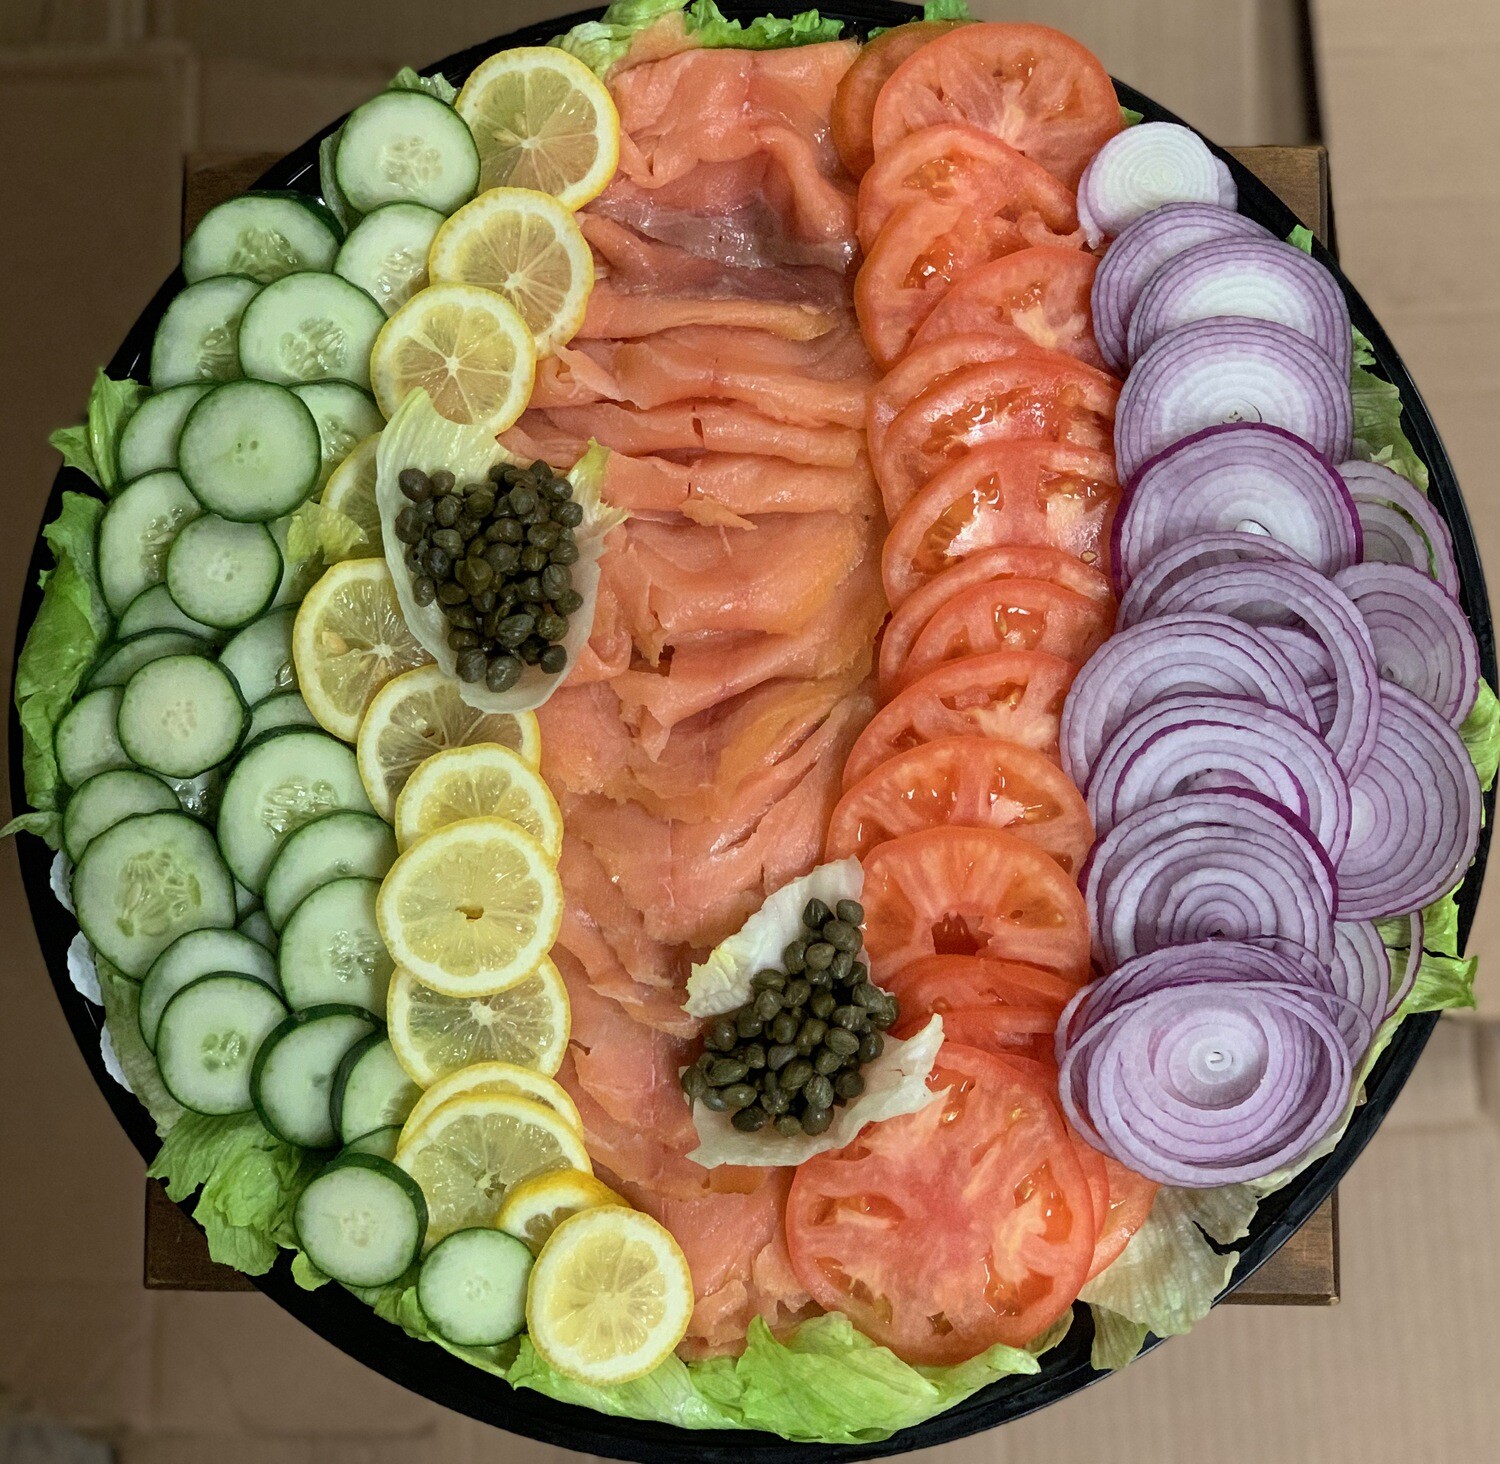 Lox Platter with Bagels